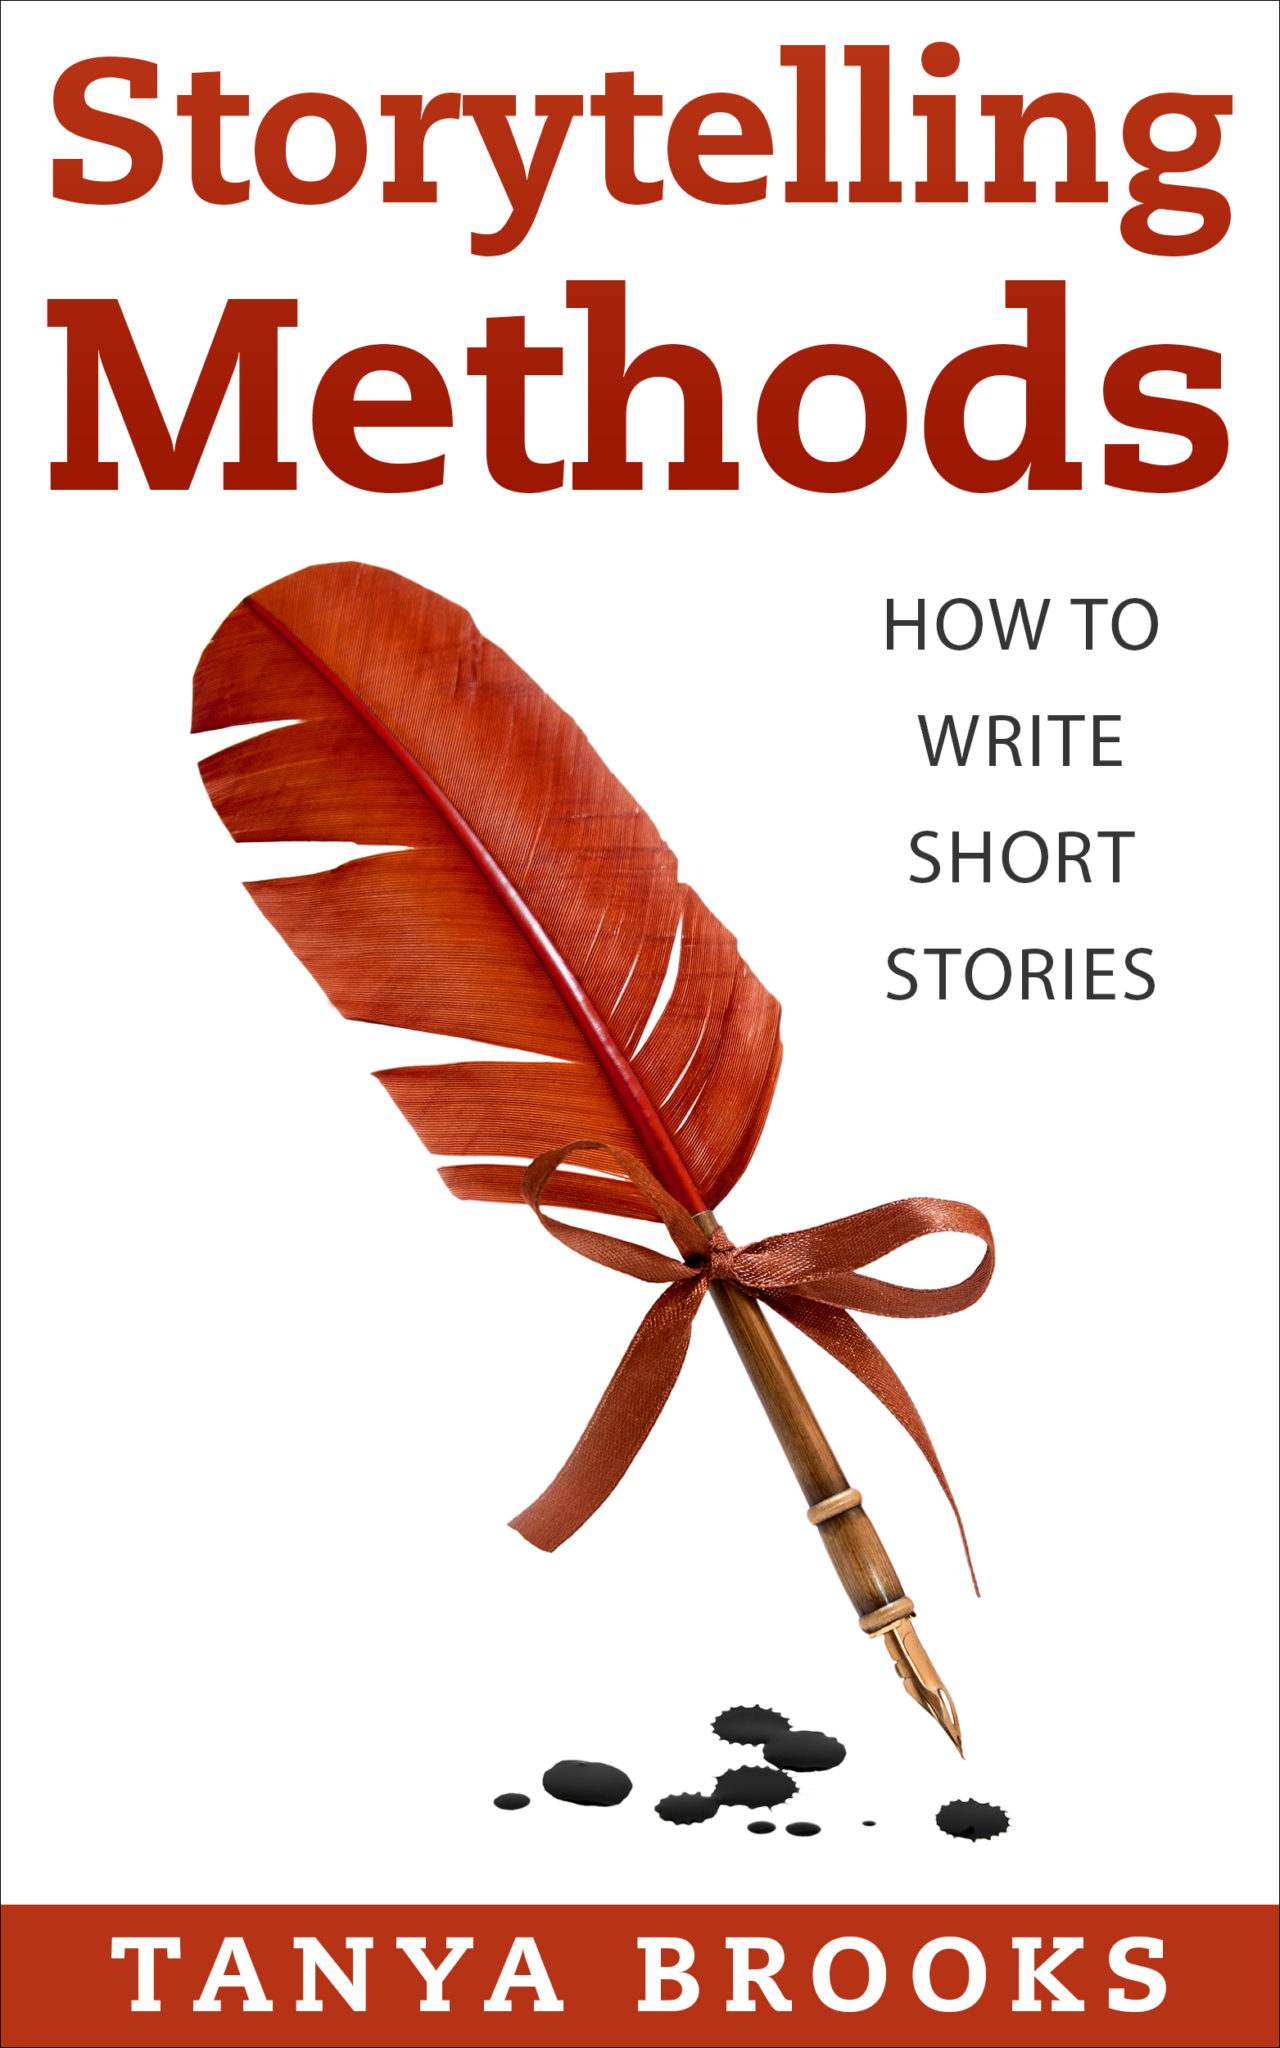 FREE: Storytelling Methods: How to Write a Short Story by Tanya Brooks